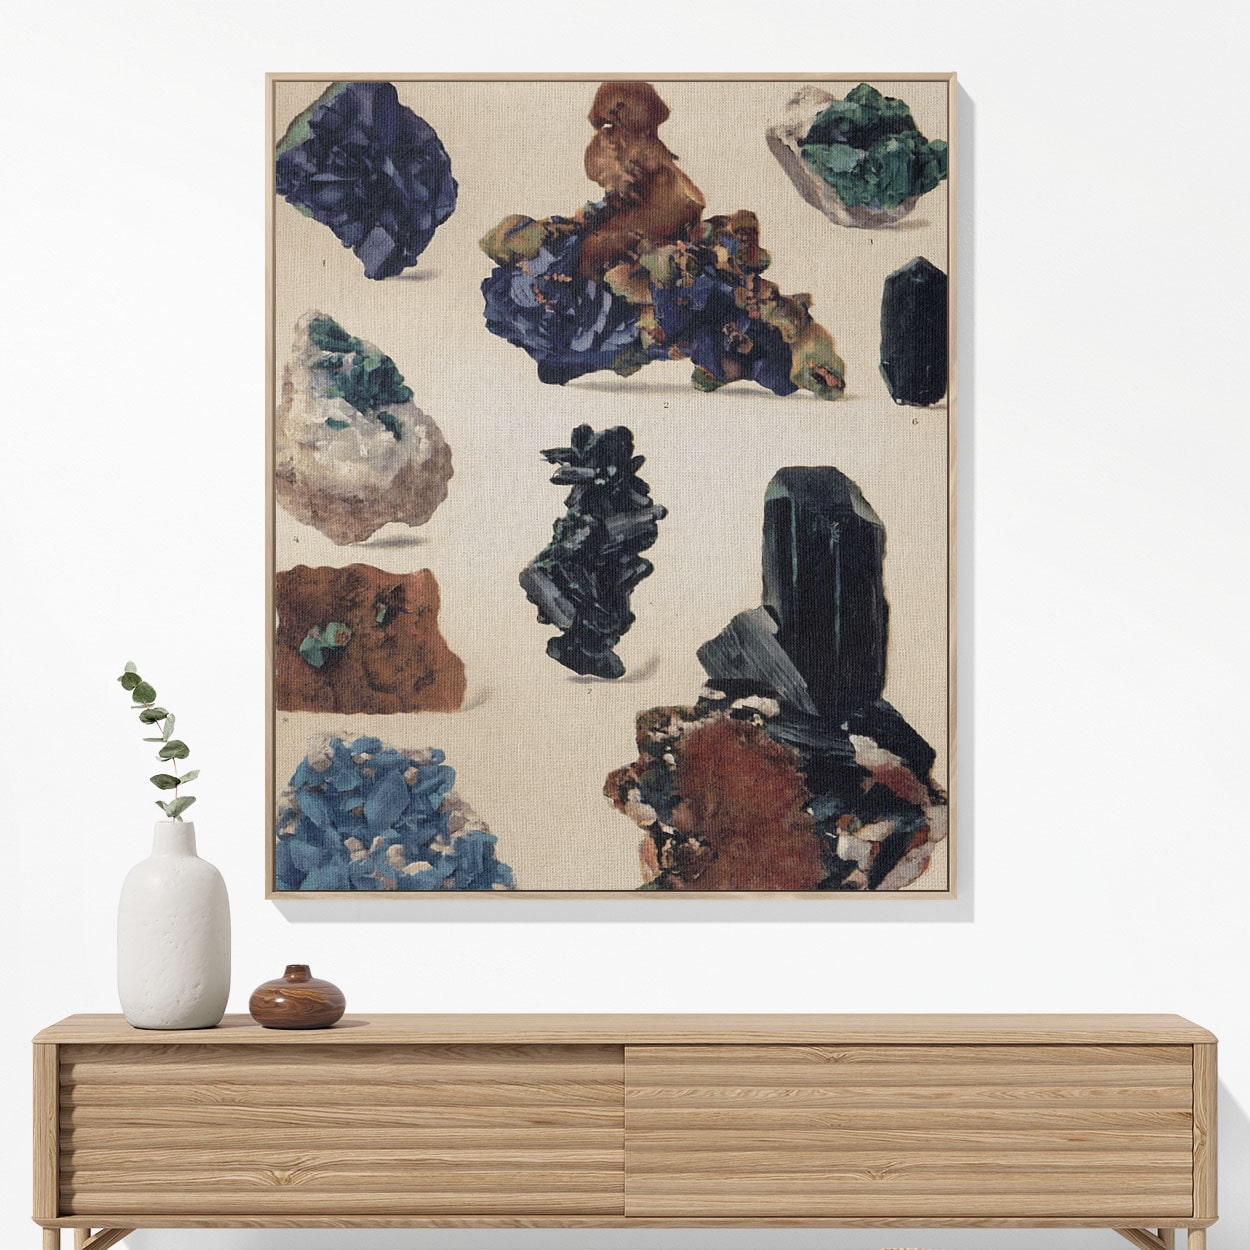 Colorful Gemstone Woven Blanket Woven Blanket Hanging on a Wall as Framed Wall Art